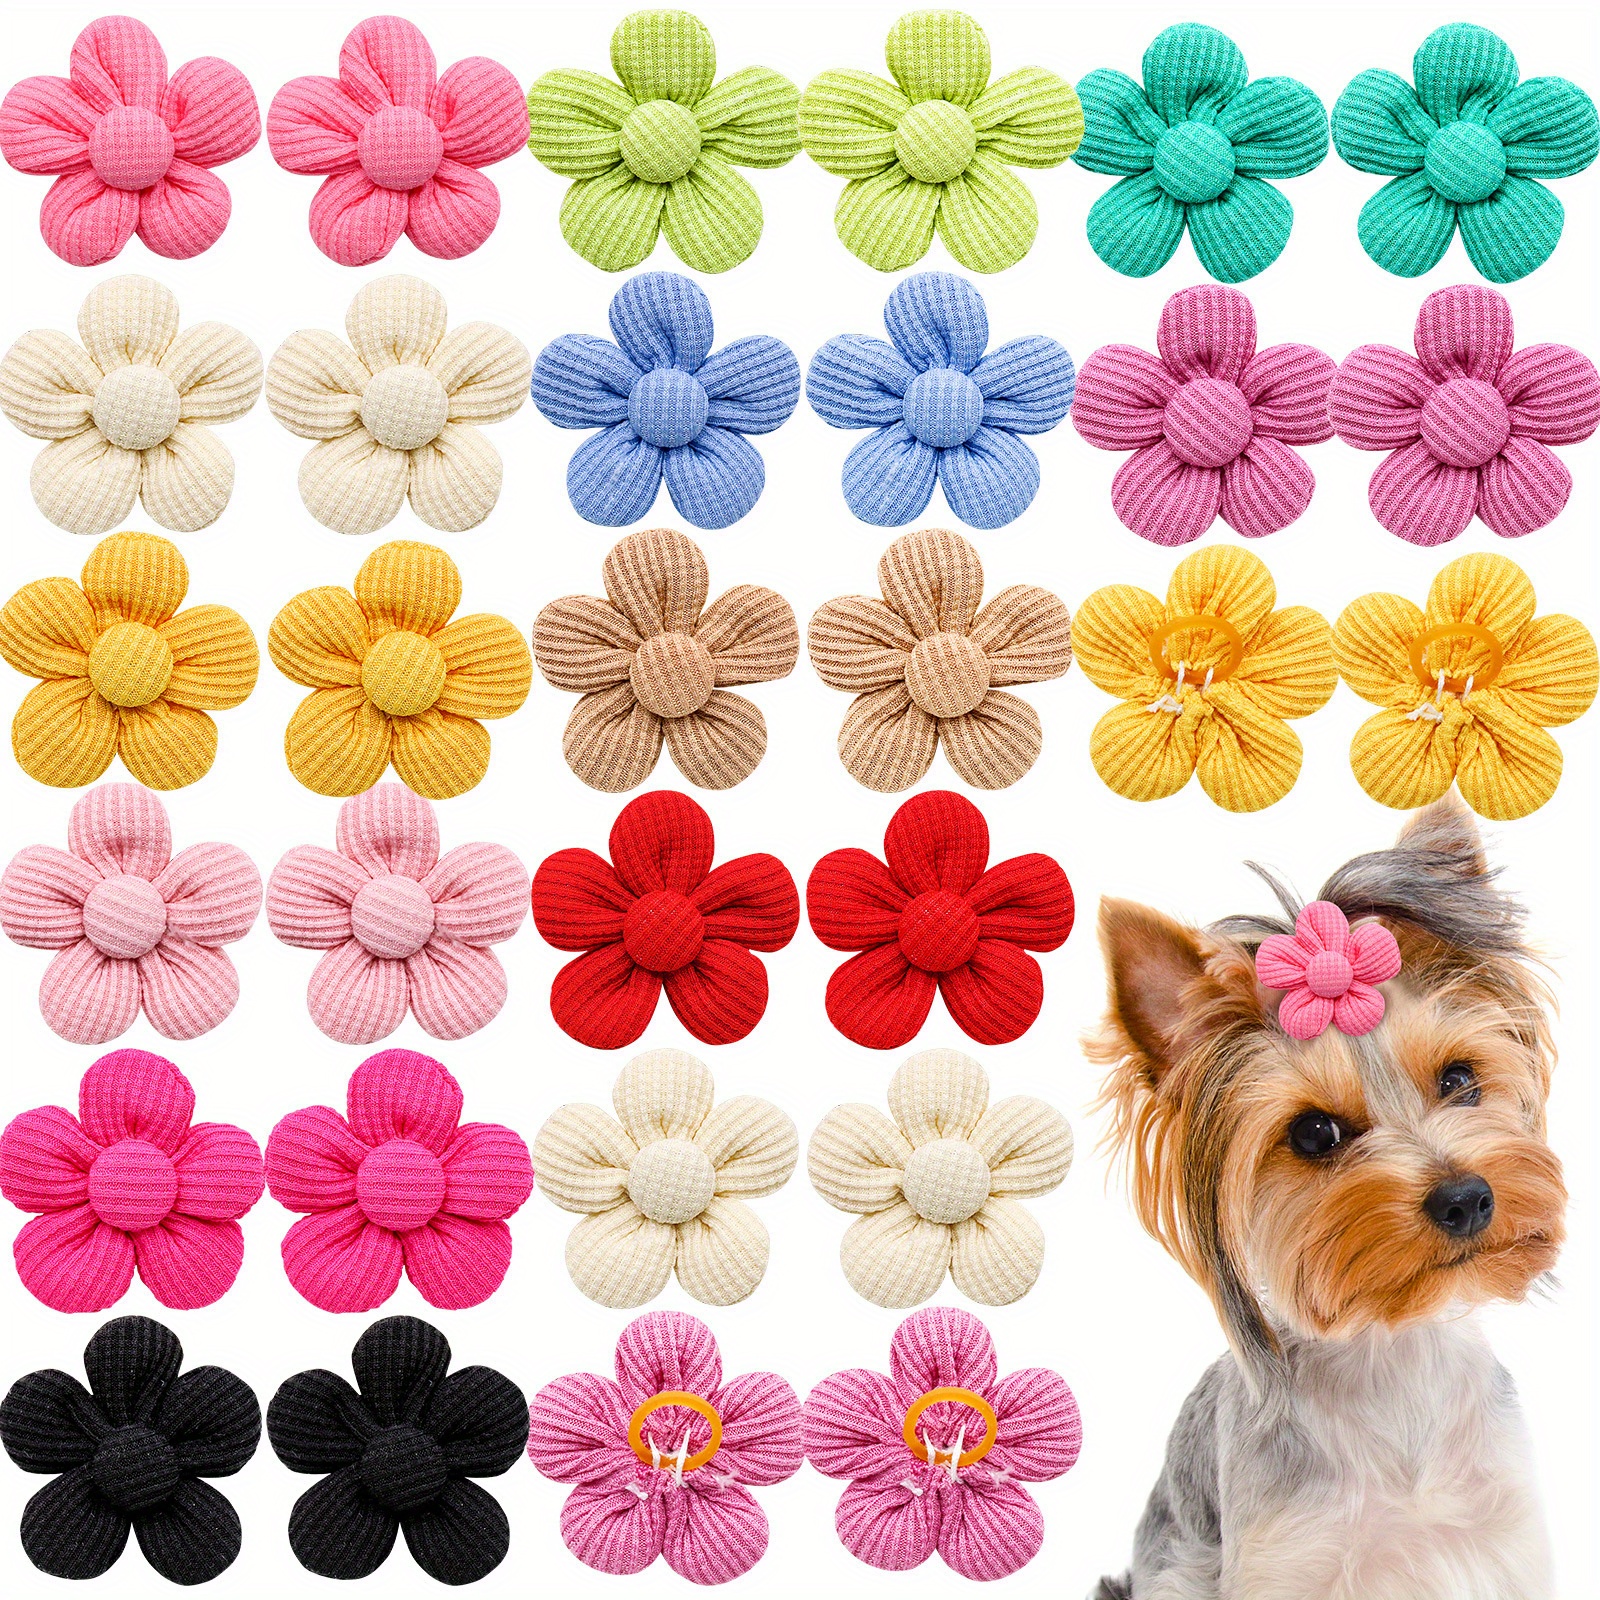 

20pcs/set Assorted Color Pet Hair Bows With Rubber Bands, Flower Design Fabric Hair Accessories For Dogs & Cats, Spring Pet Collection